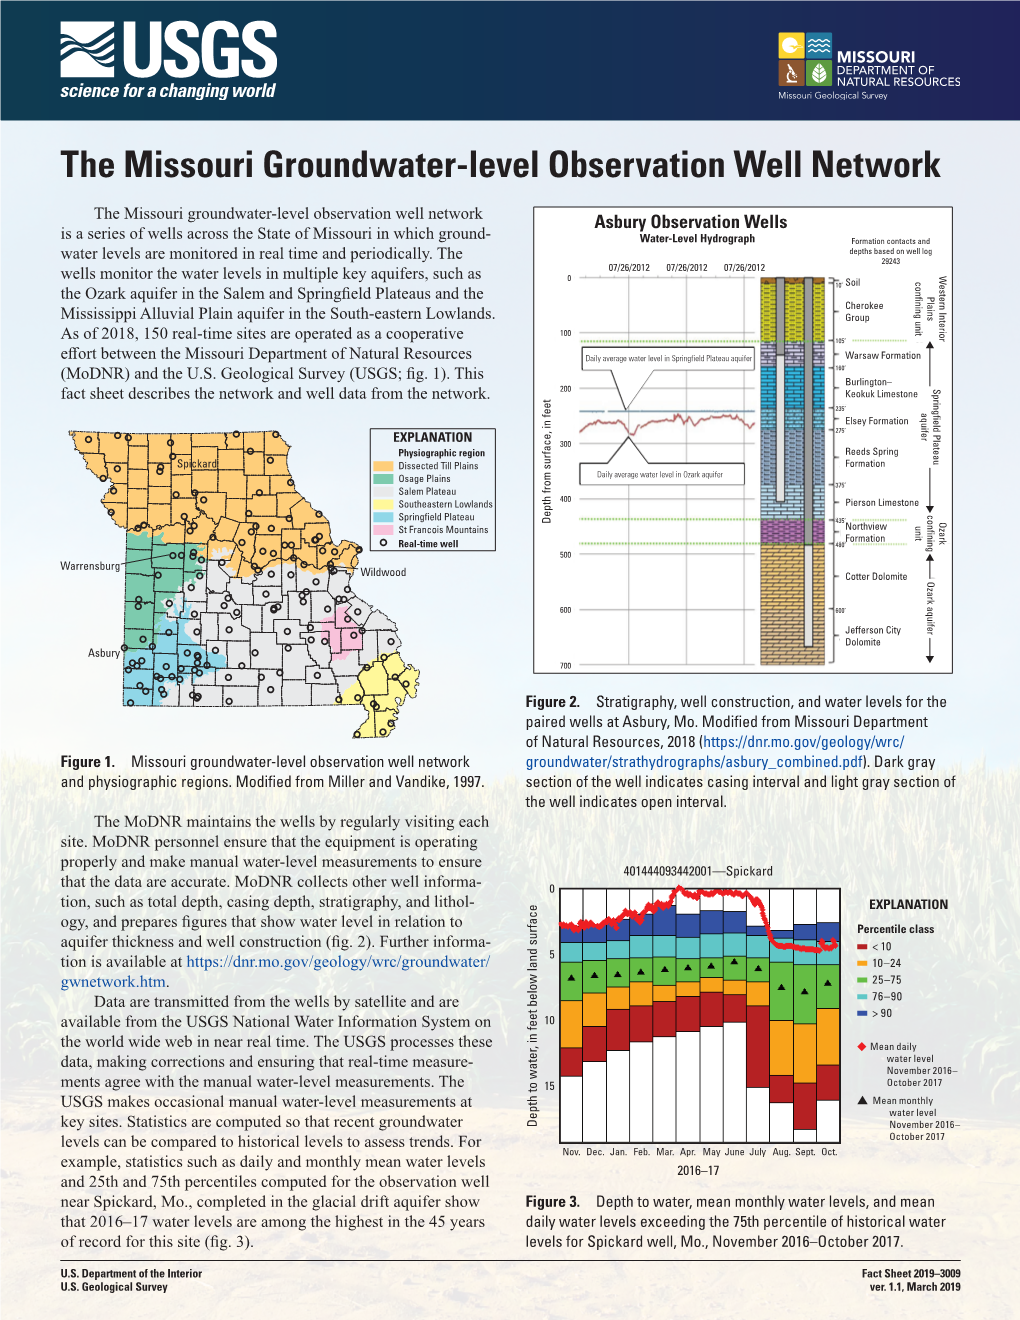 The Missouri Groundwater-Level Observation Well Network